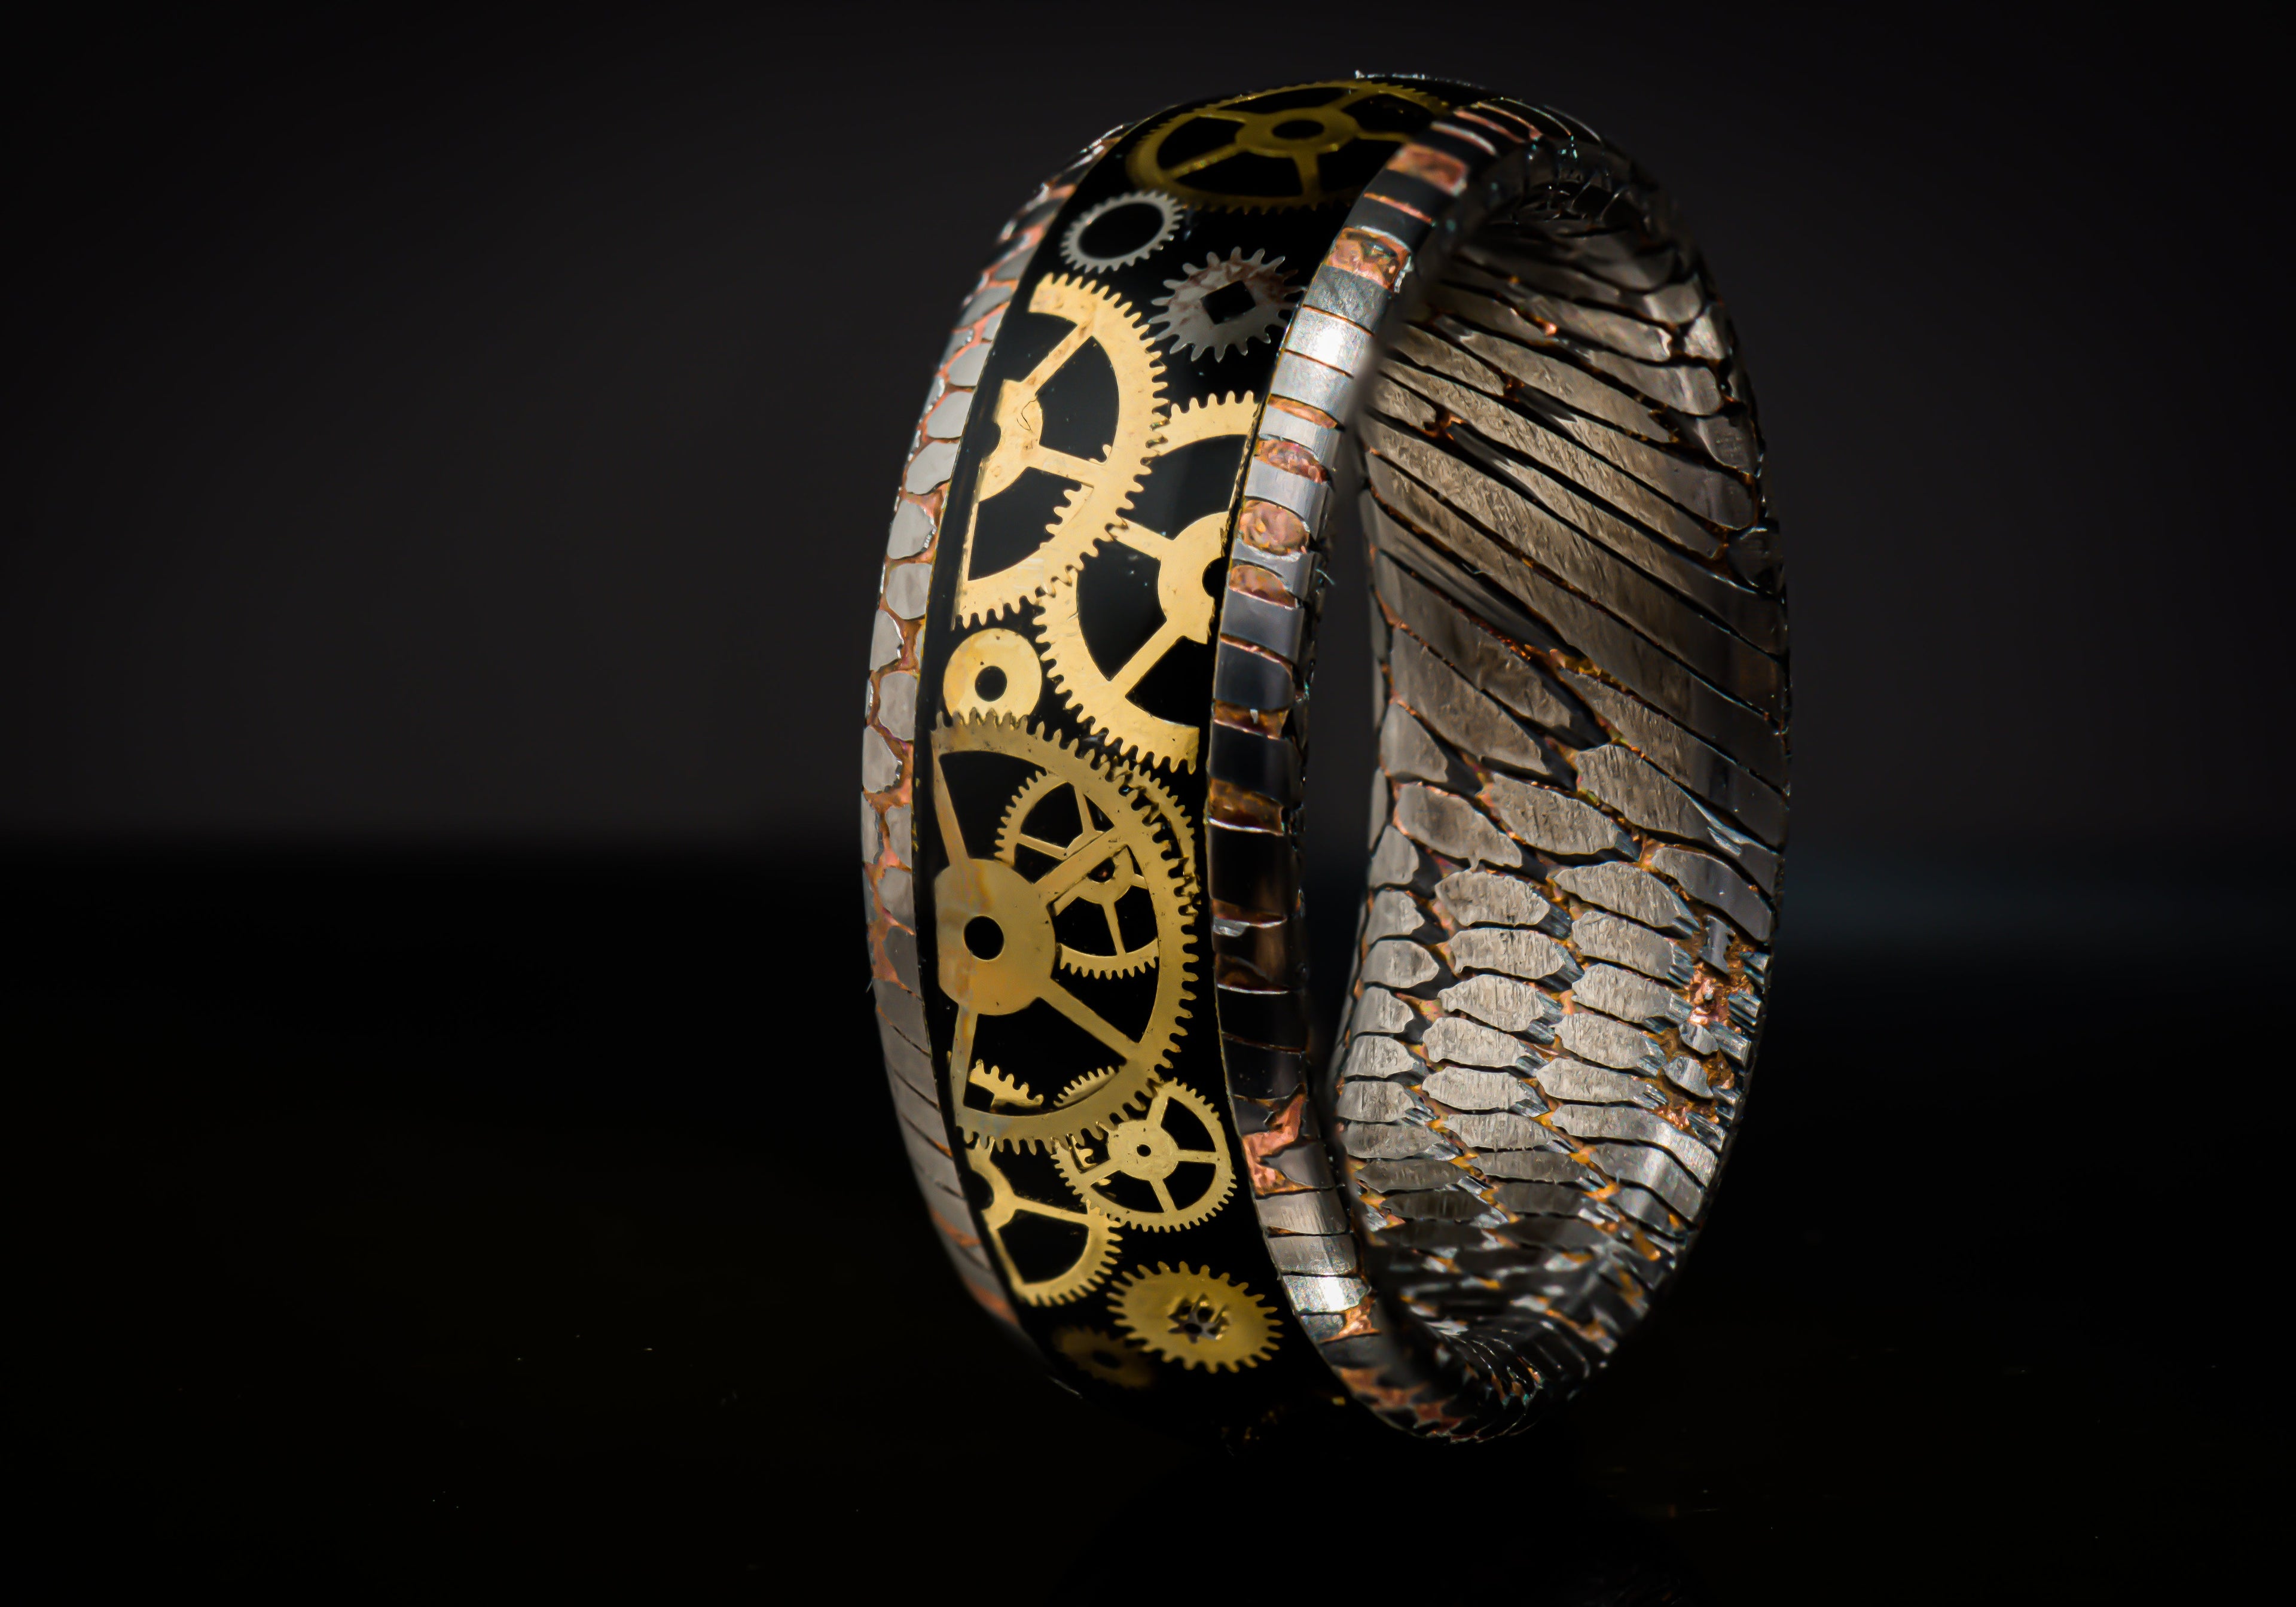 The Superconductor + Steampunk Ring